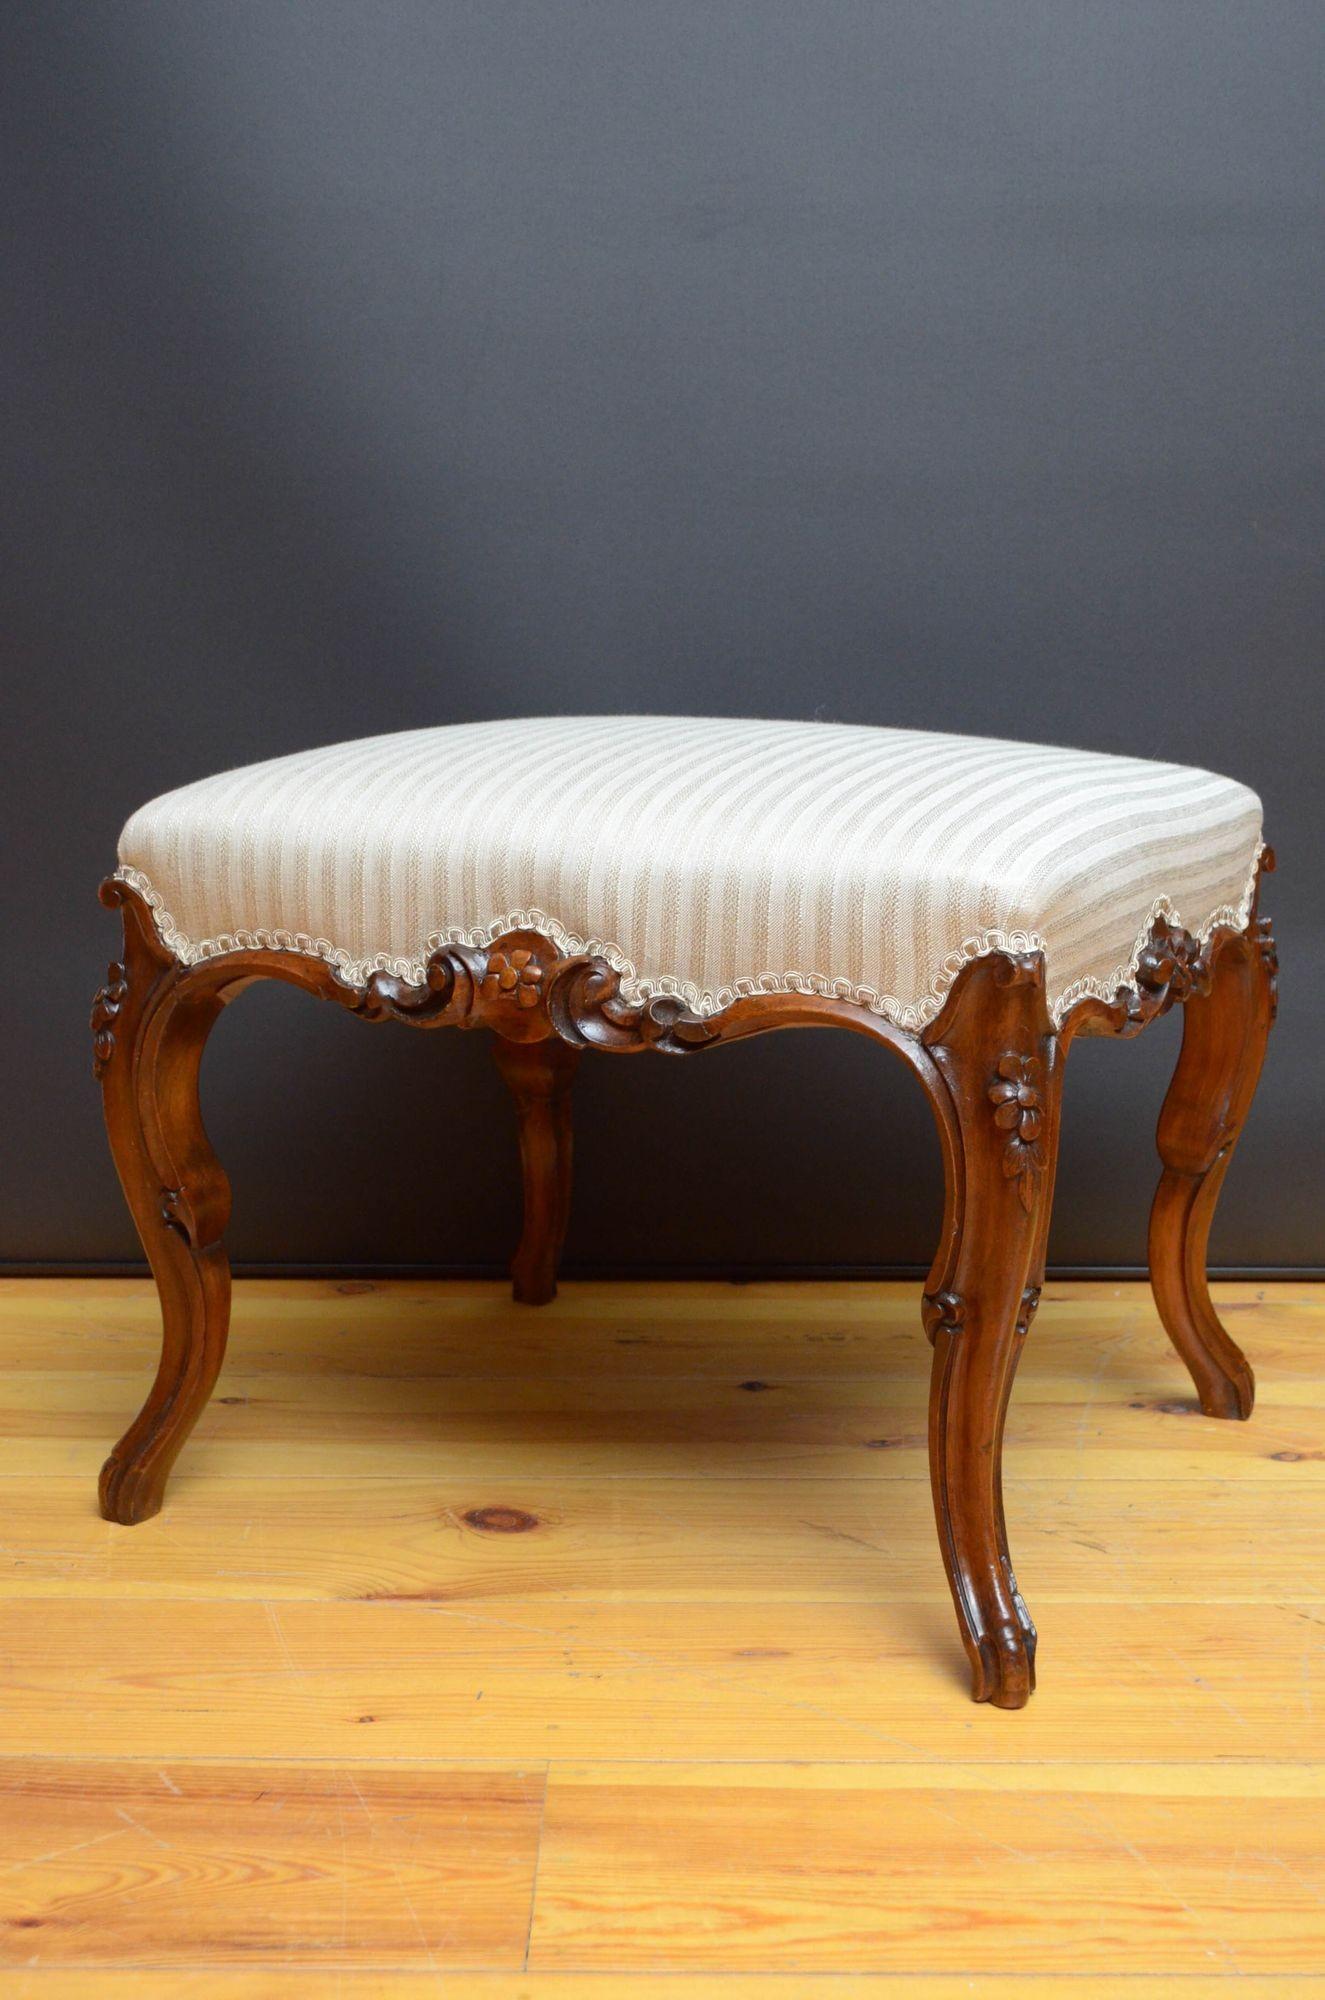 Sn5236 Fine quality Victorian dressing table stool in walnut, having newly covered seat in contemporary cream fabric, scroll carved rail and cabriole legs with floral decertation. This antique stool is in home ready condition. c1860
H17